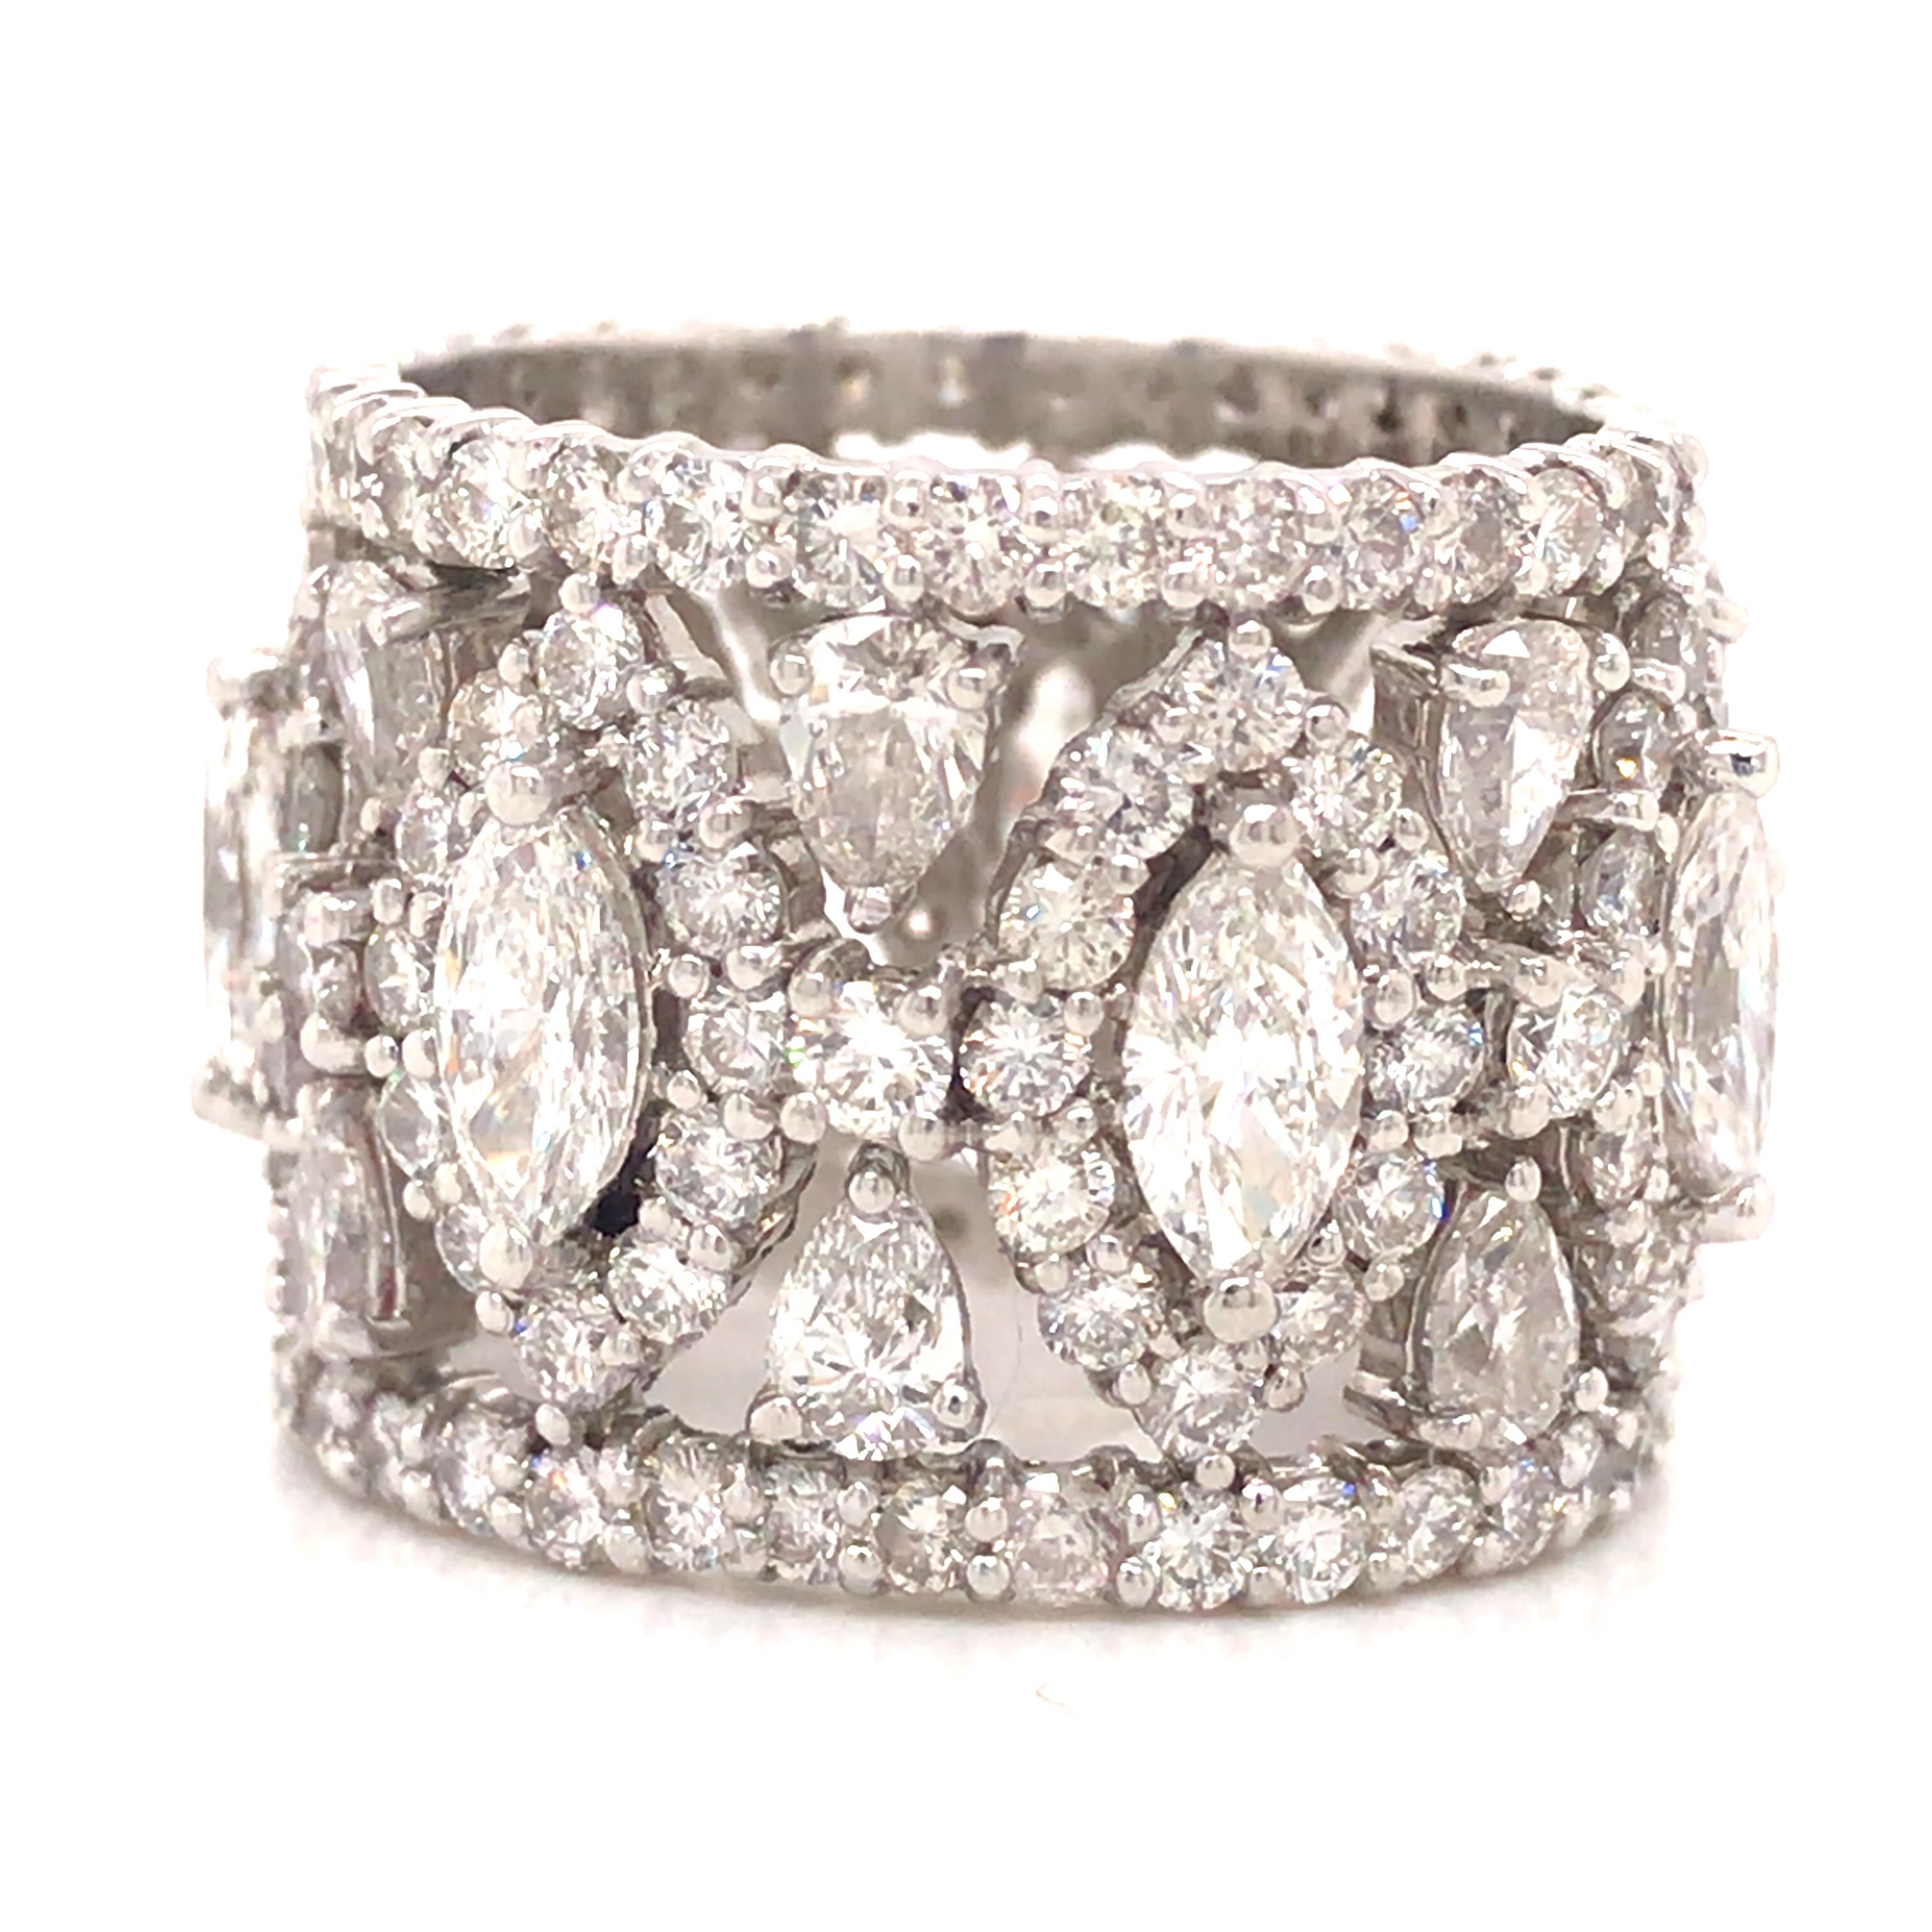 Fancy Shape Diamond Wide Eternity Band in Platinum.  (7) Marquise Shape, (14) Pear Shape and Round Brilliant Cut Diamonds weighing 8.82 carat total weight, G-H in color and VS-SI in clarity are expertly set.  The Ring measures 3/8 inch in width. 